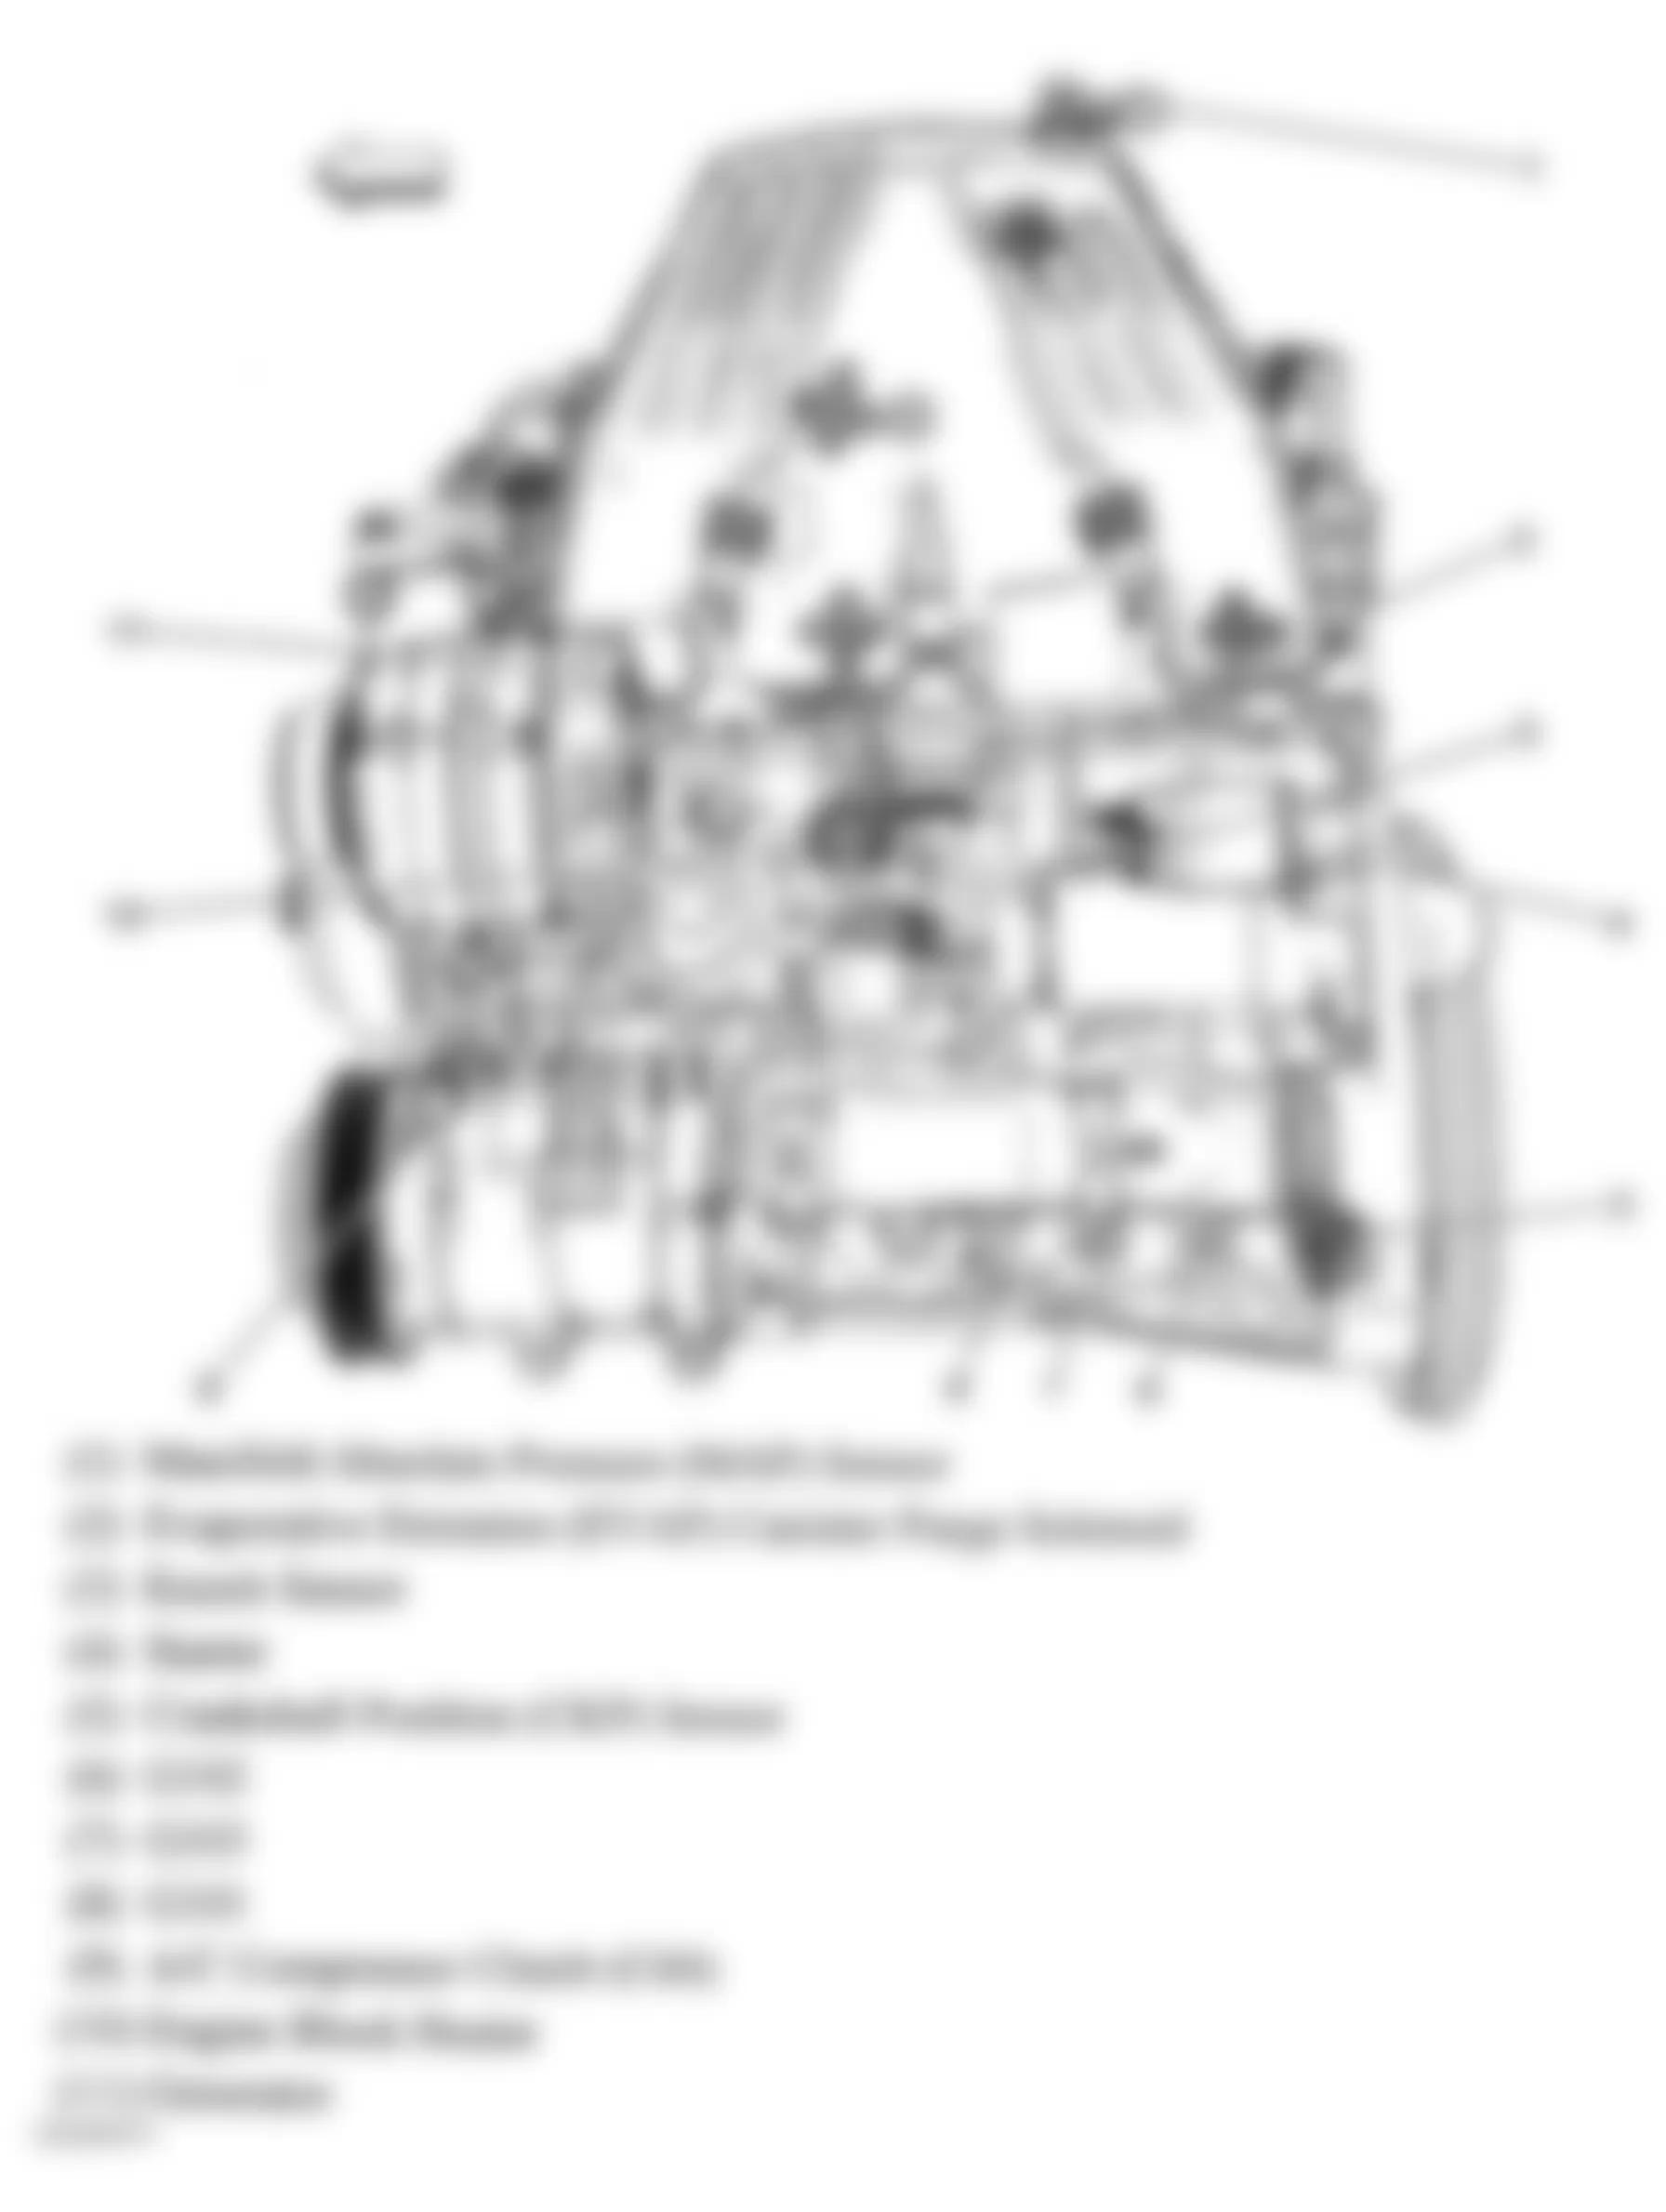 Chevrolet Colorado 2008 - Component Locations -  Left Side Of Engine (2.9L)